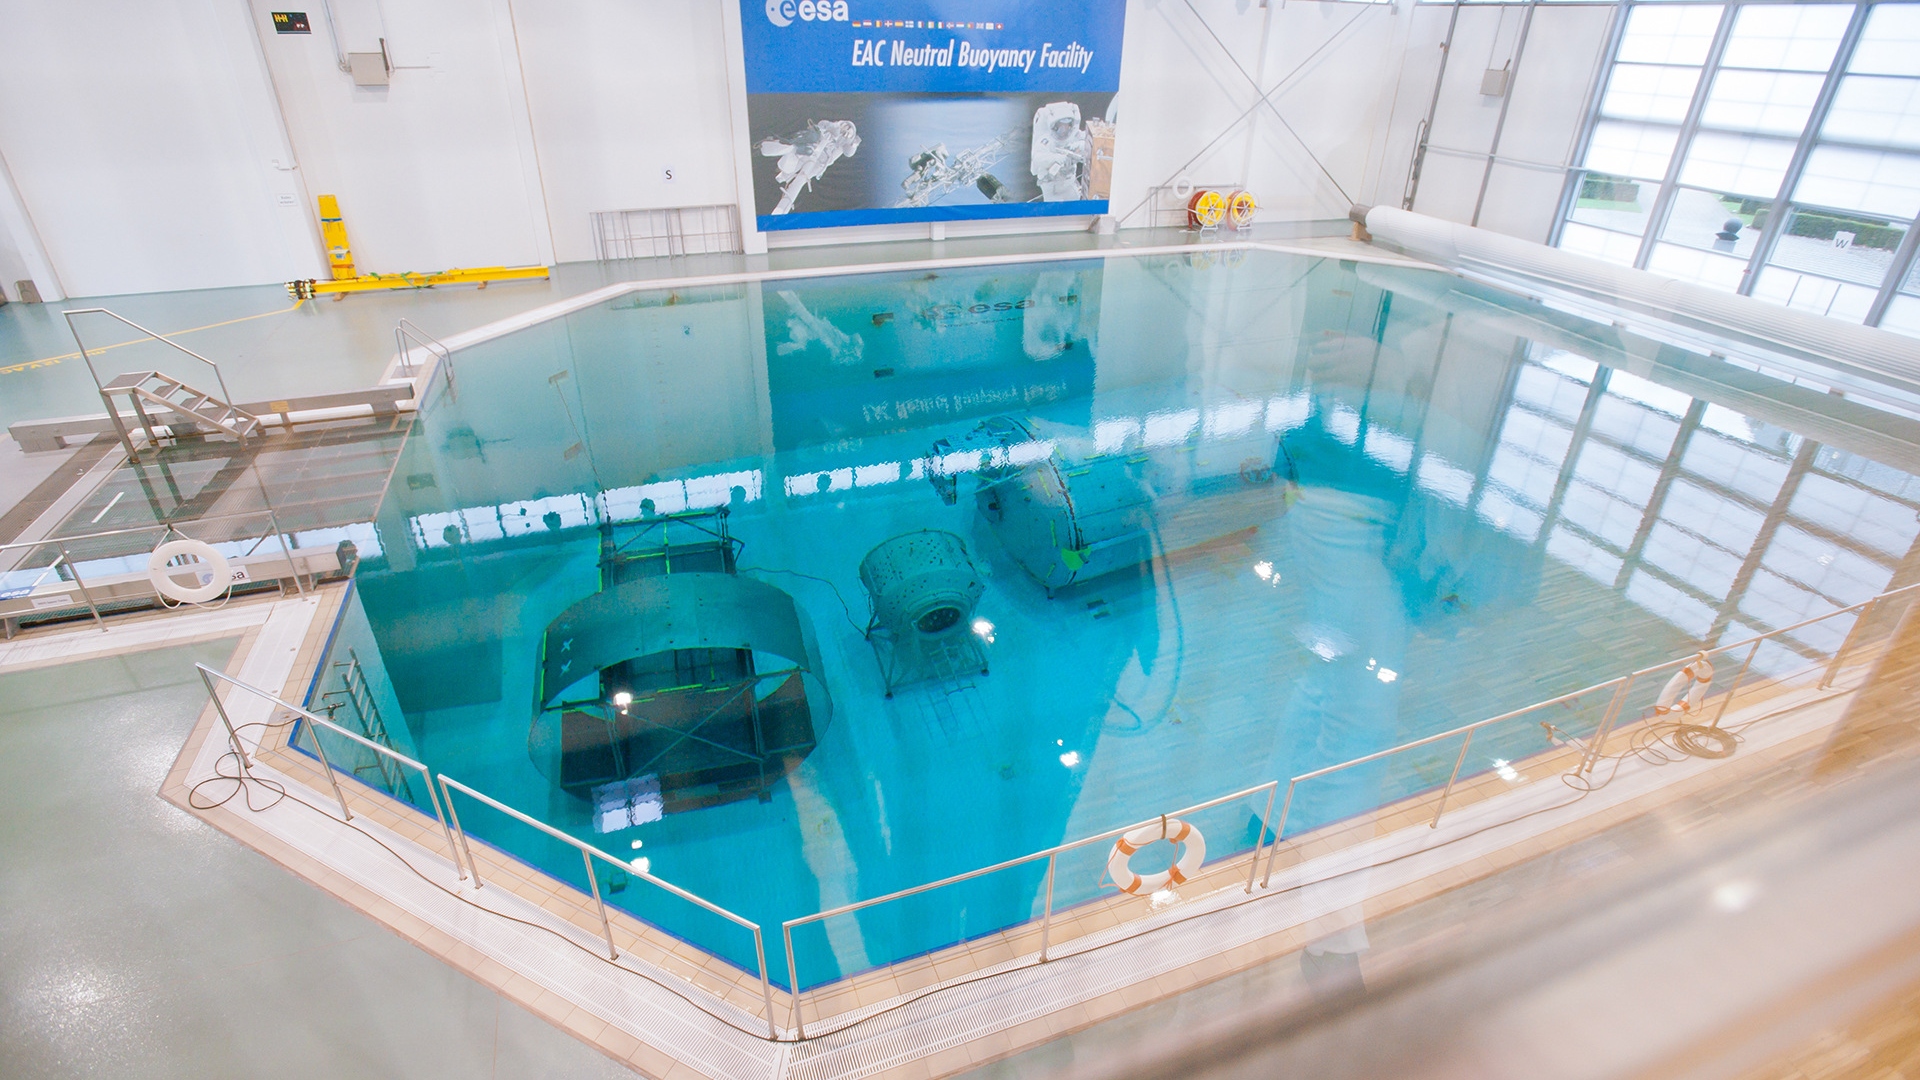 The pool for underwater training